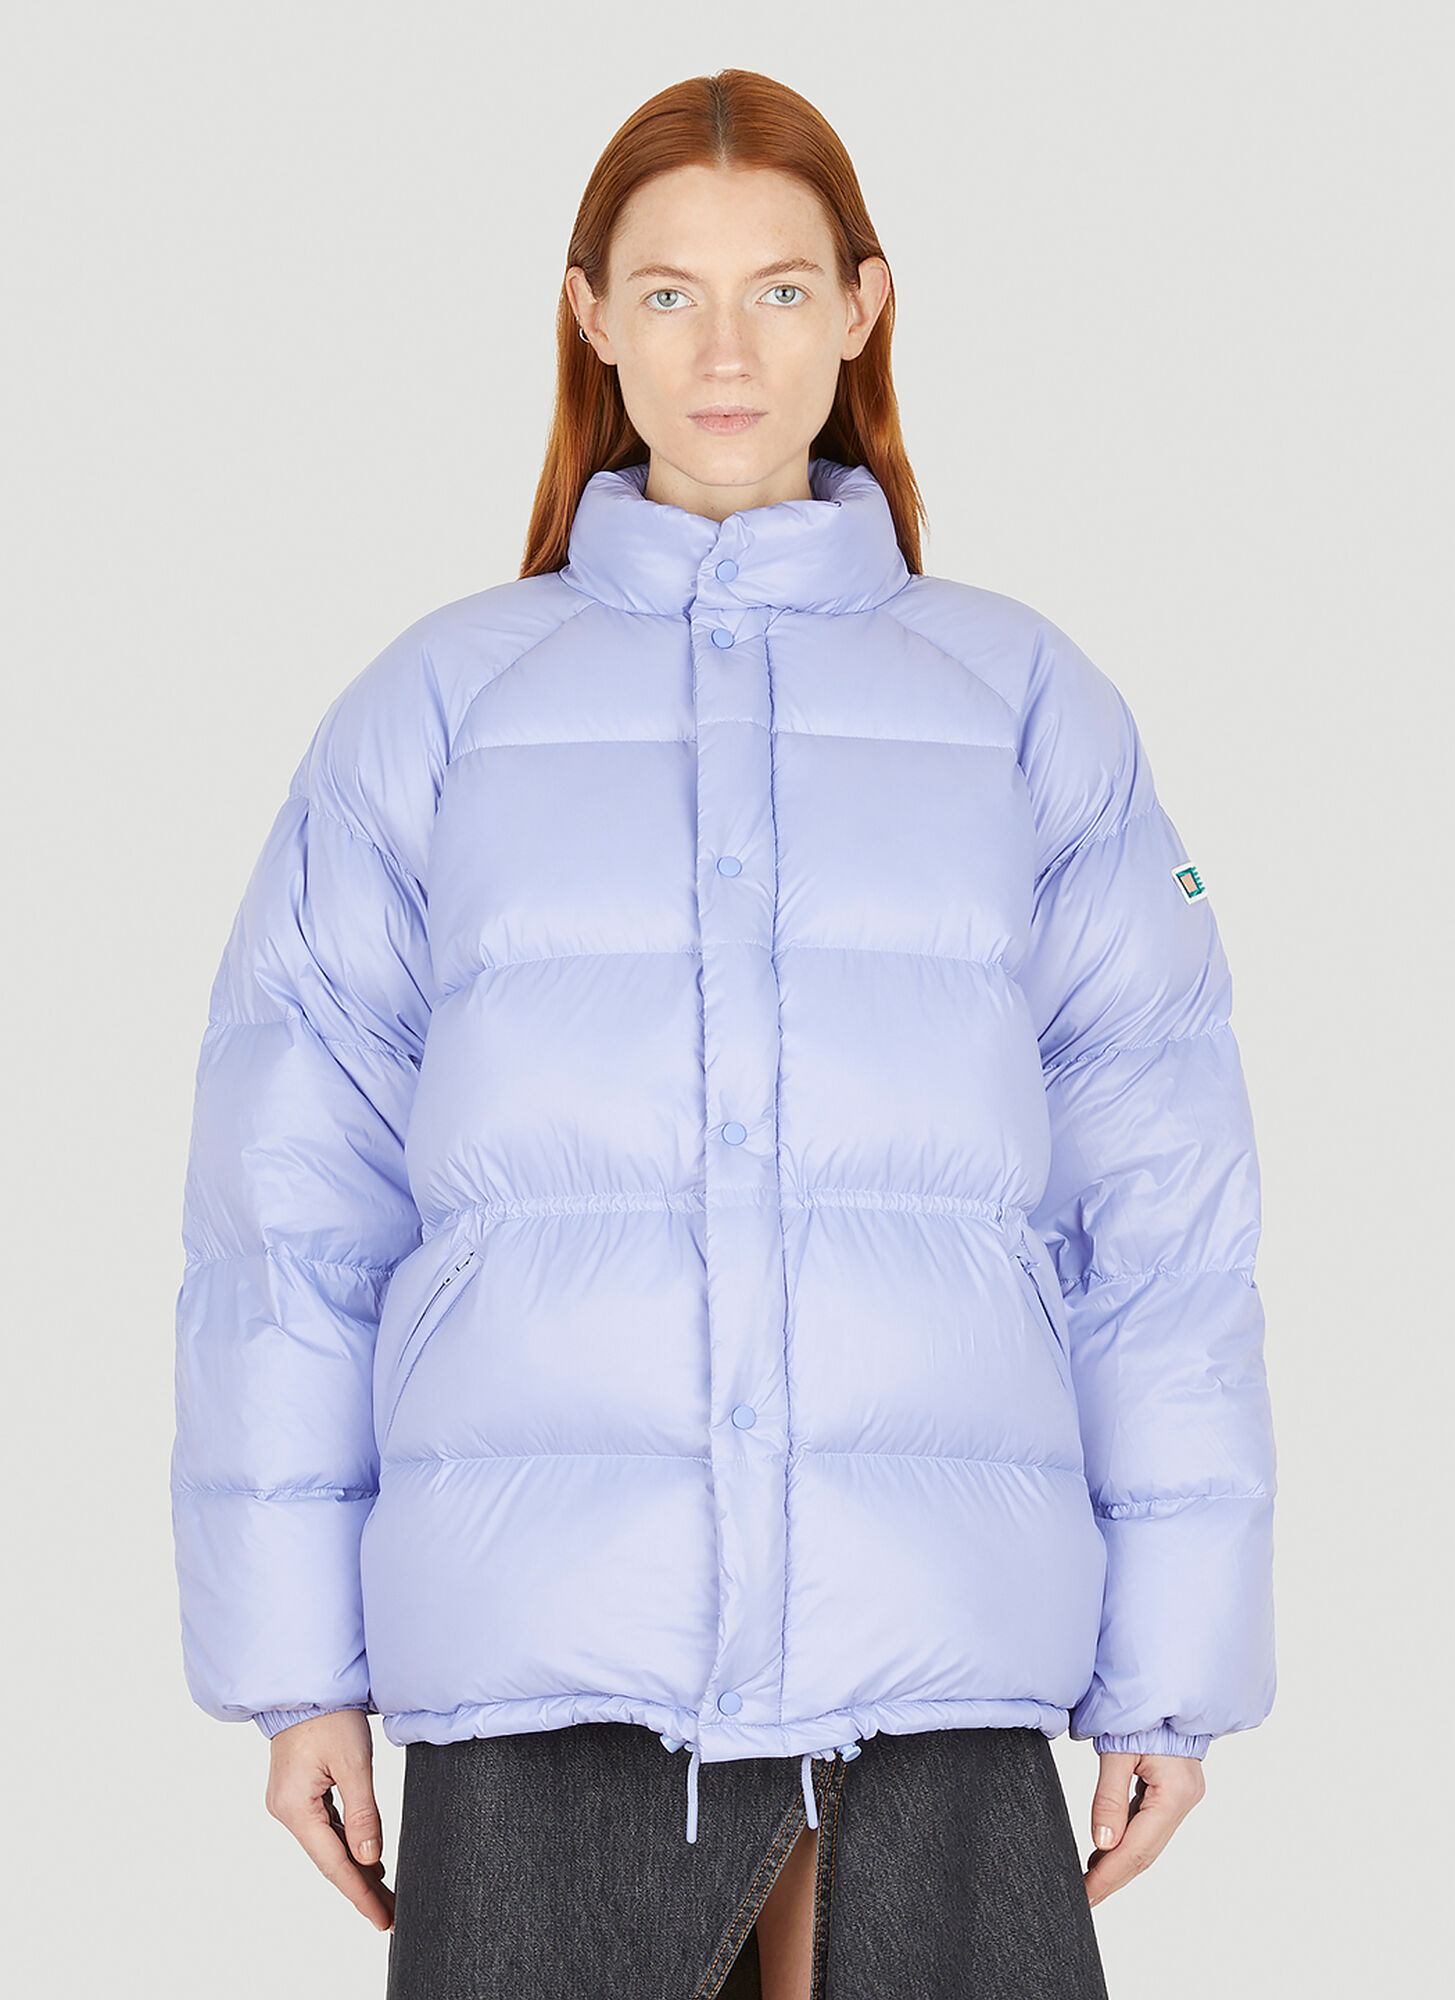 RODEBJER MAURICE PUFFER JACKET